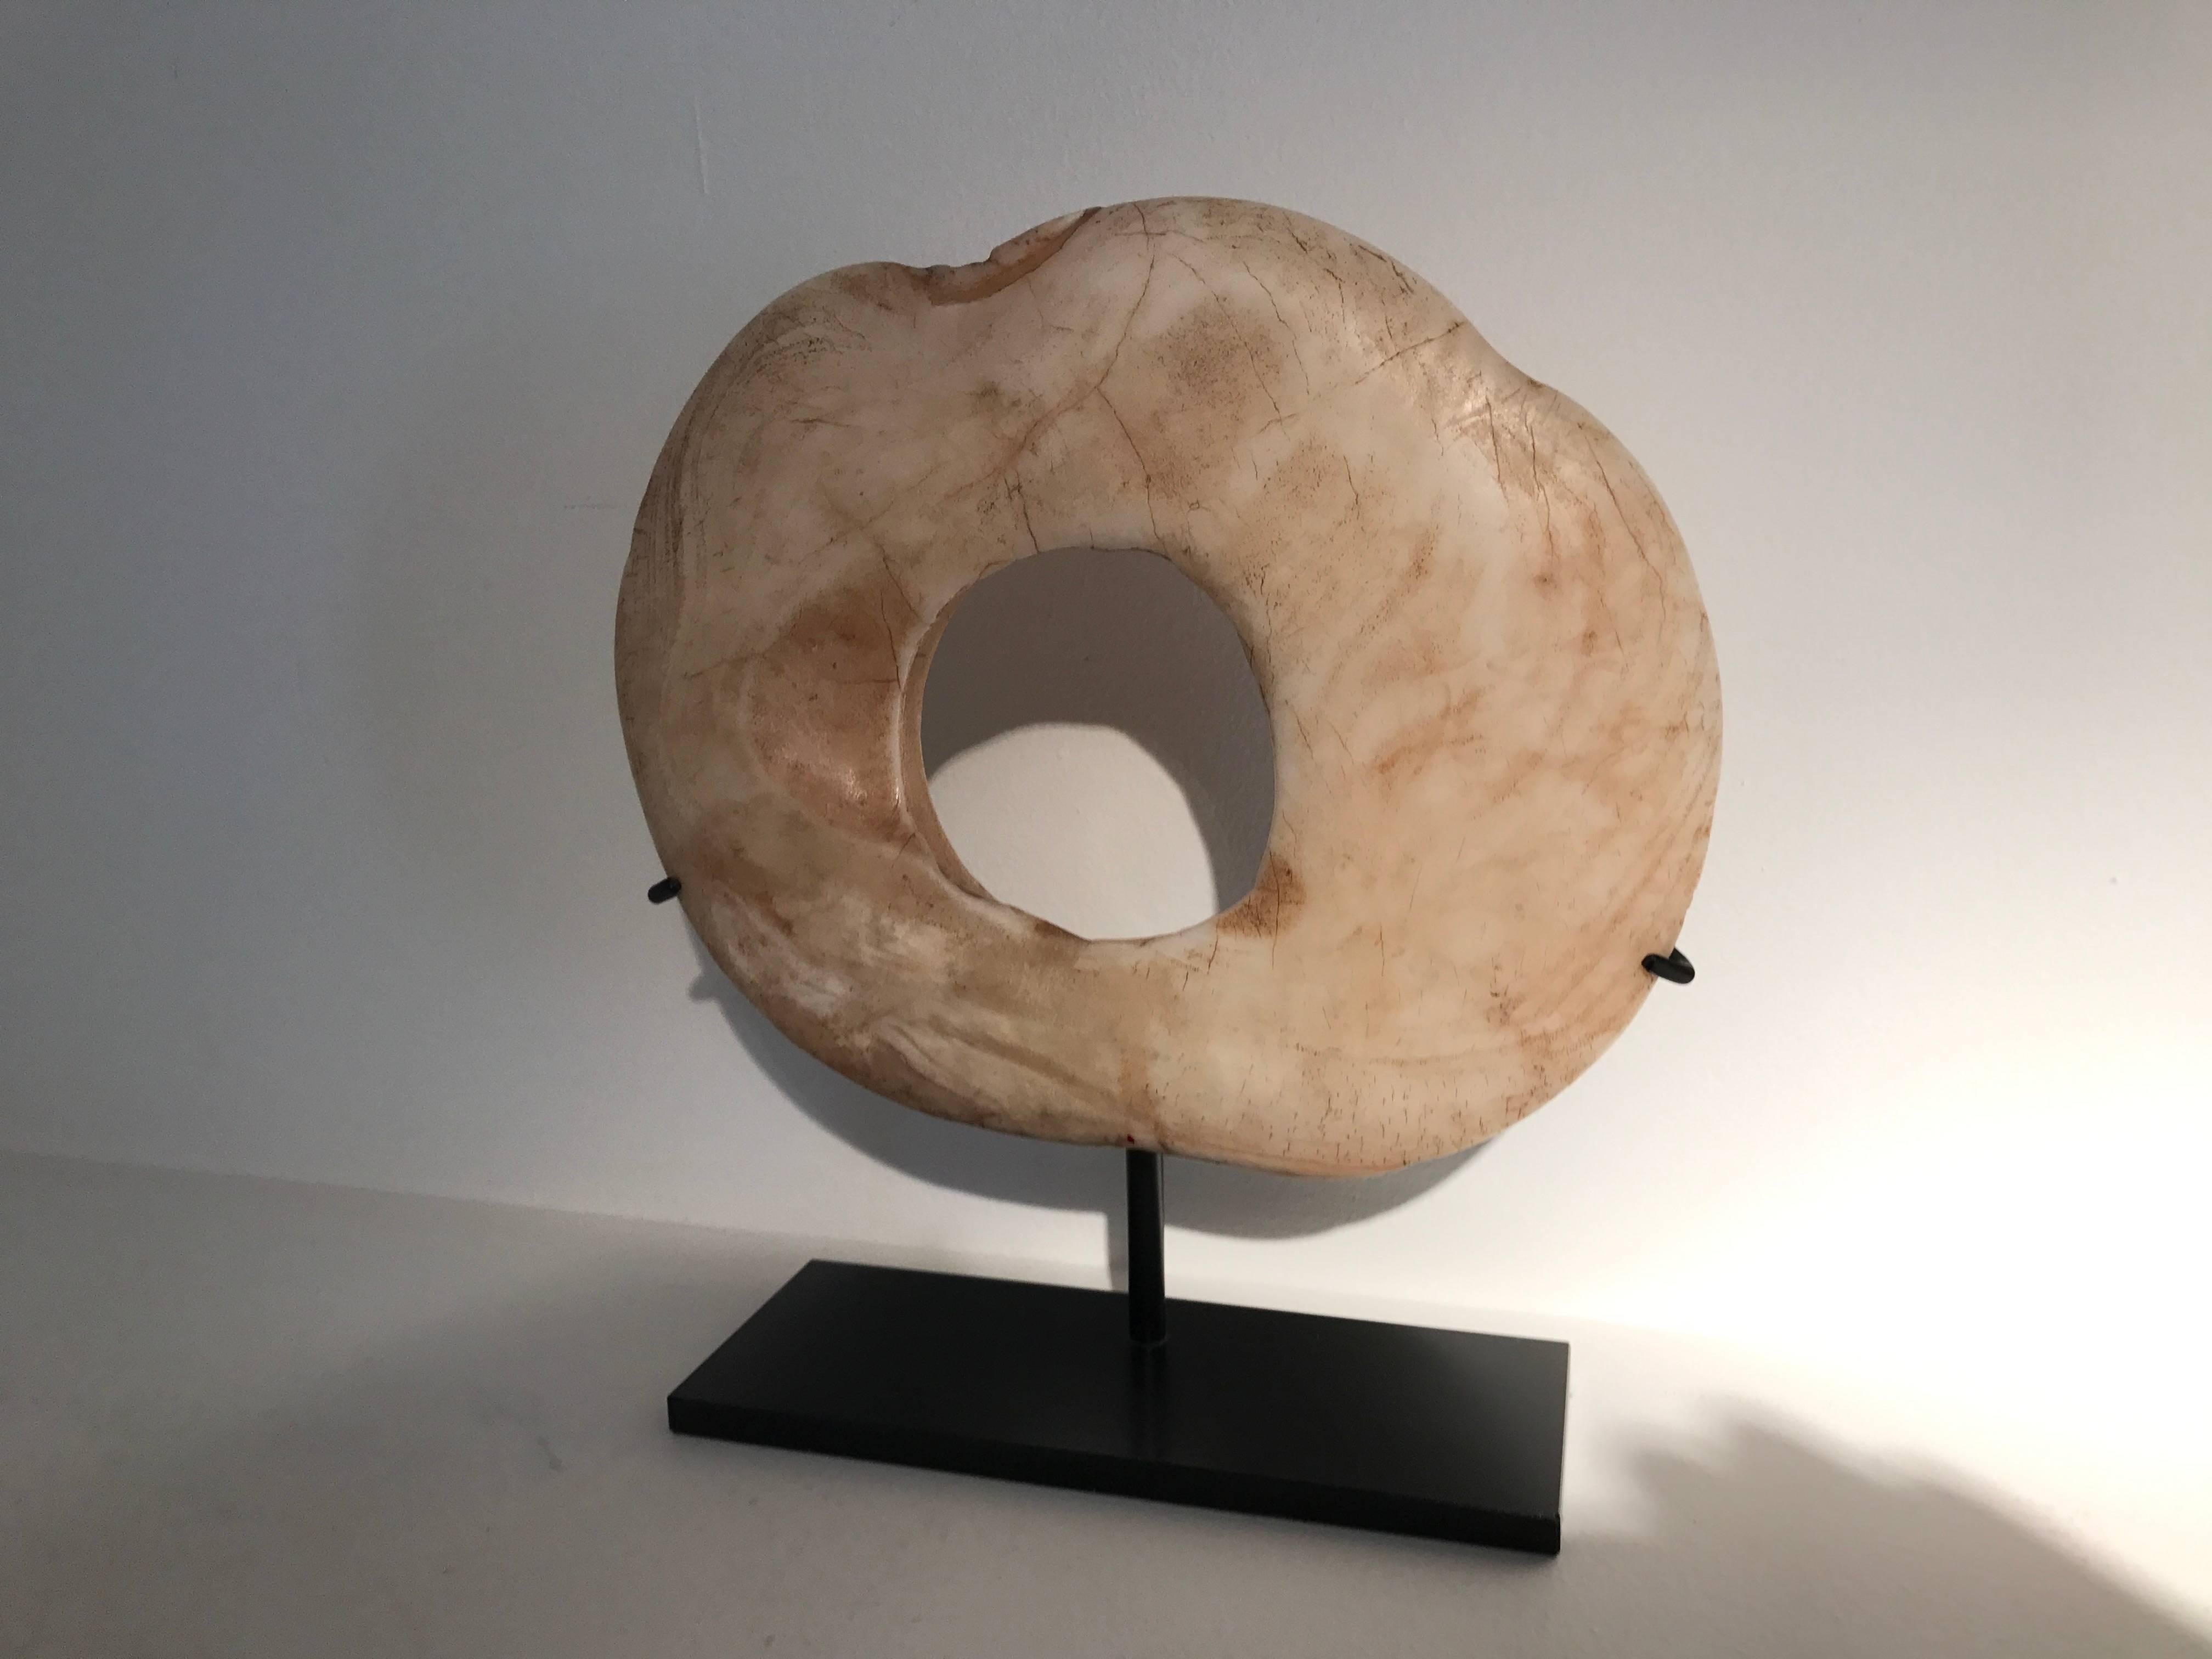 Exceptional Boiken made of the Tridacna gigas shell,
diameter is 23 cm
diameter hole is 8 cm
thick 3 cm.

Nice to place as a collection of three pieces.